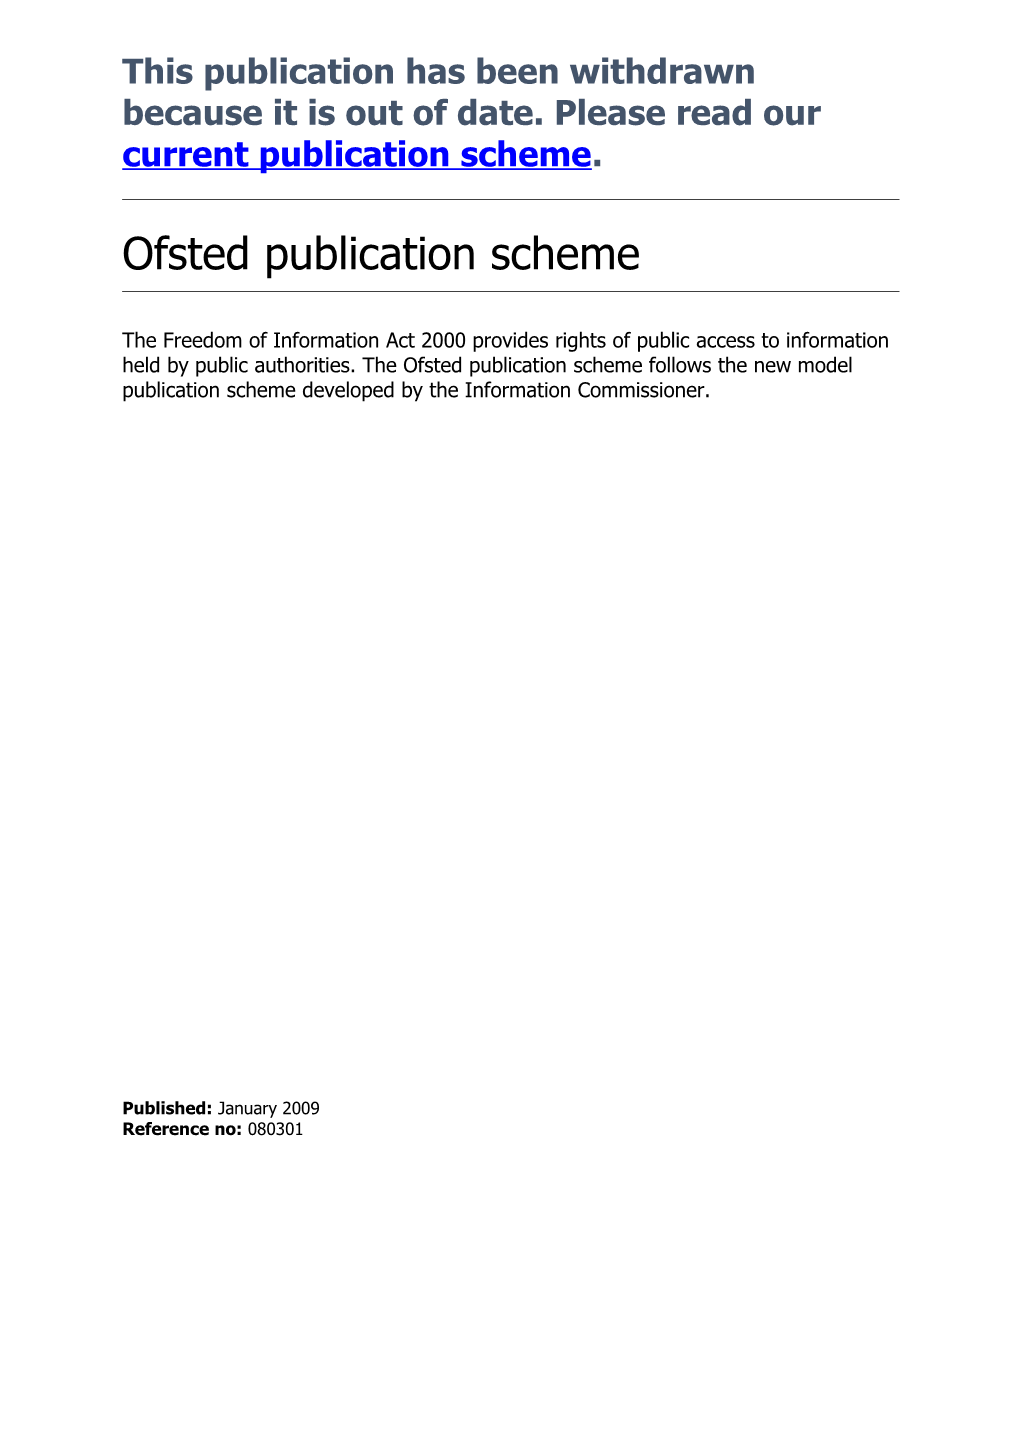 Freedom of Information - Ofsted Publication Scheme